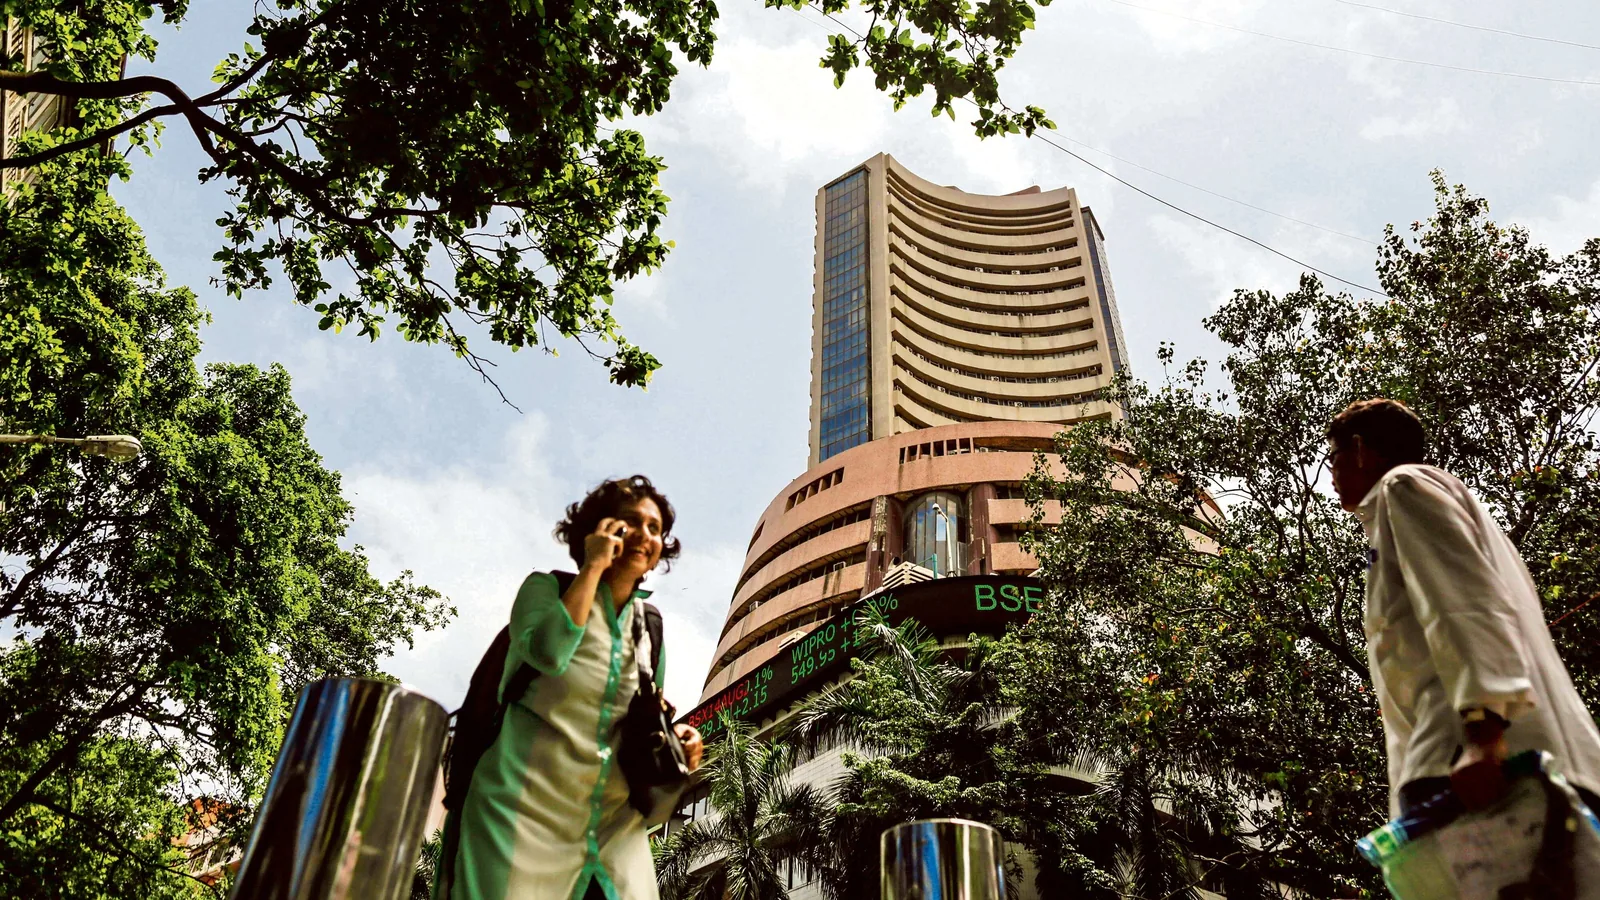 Sensex soars over 300 pts to close day at 57,944; Nifty ends session at 17,325